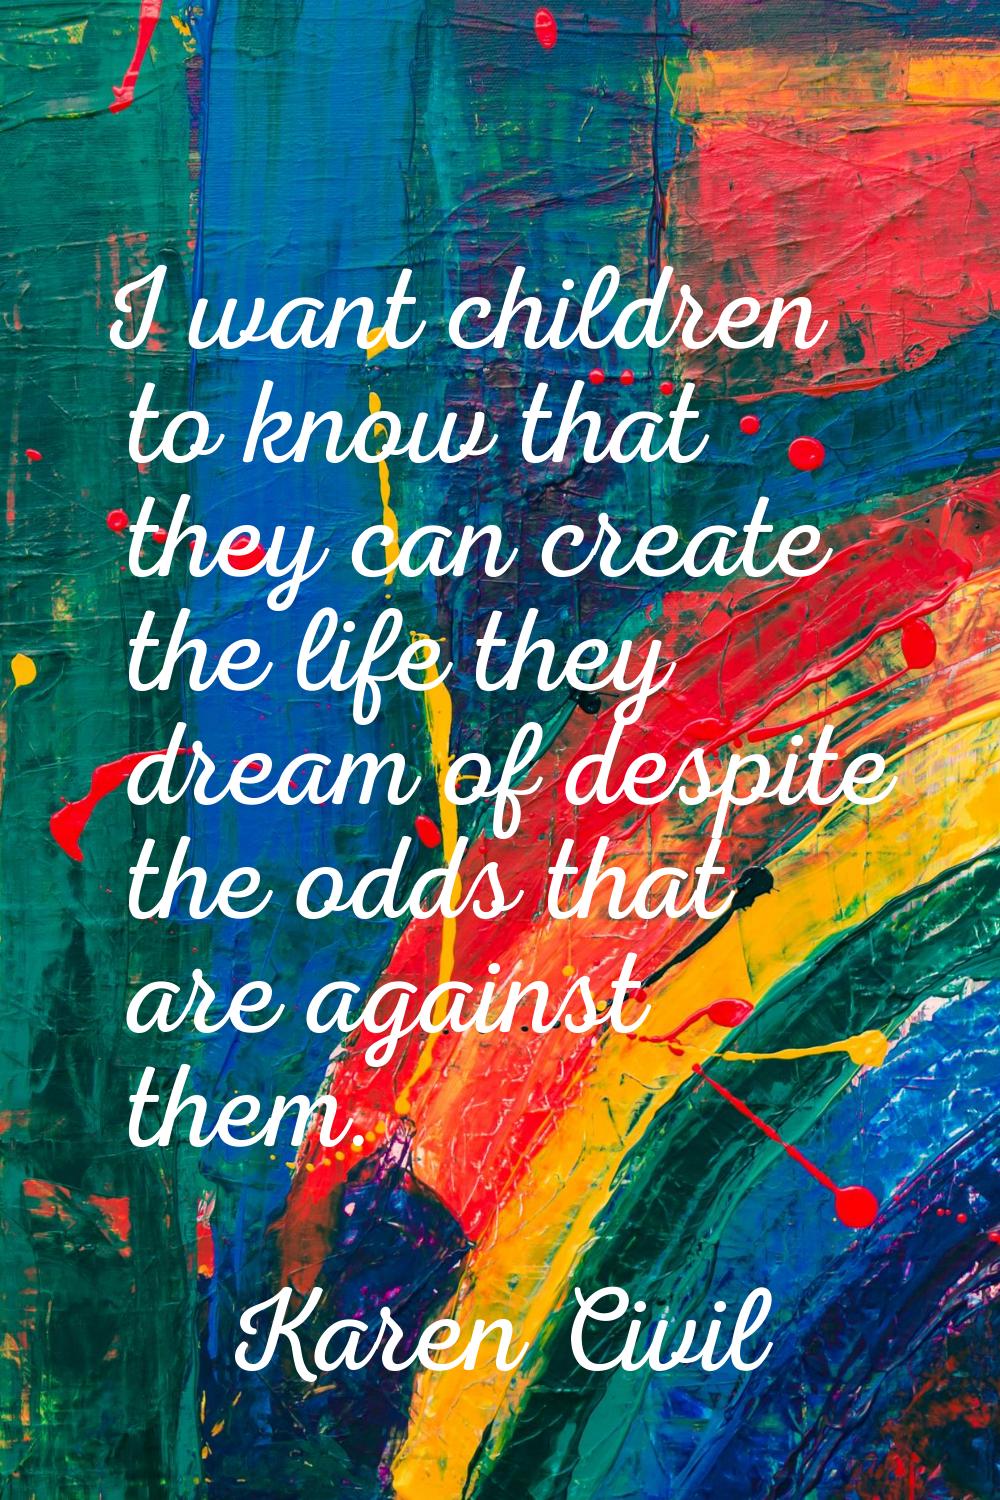 I want children to know that they can create the life they dream of despite the odds that are again